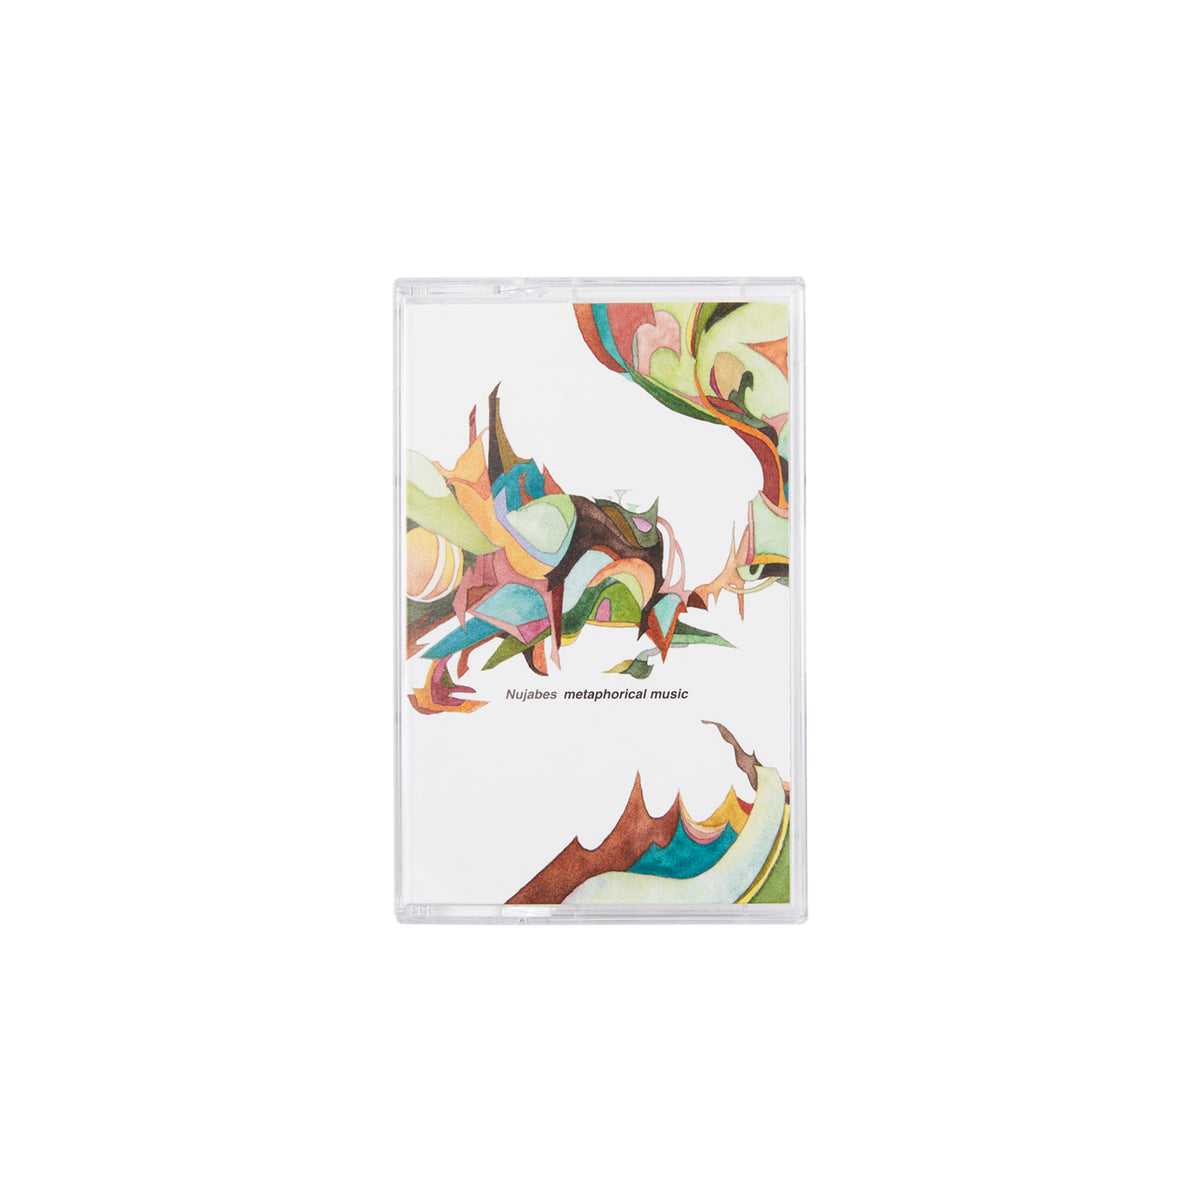 Nujabes / metaphorical music cassette tape – YEN TOWN MARKET